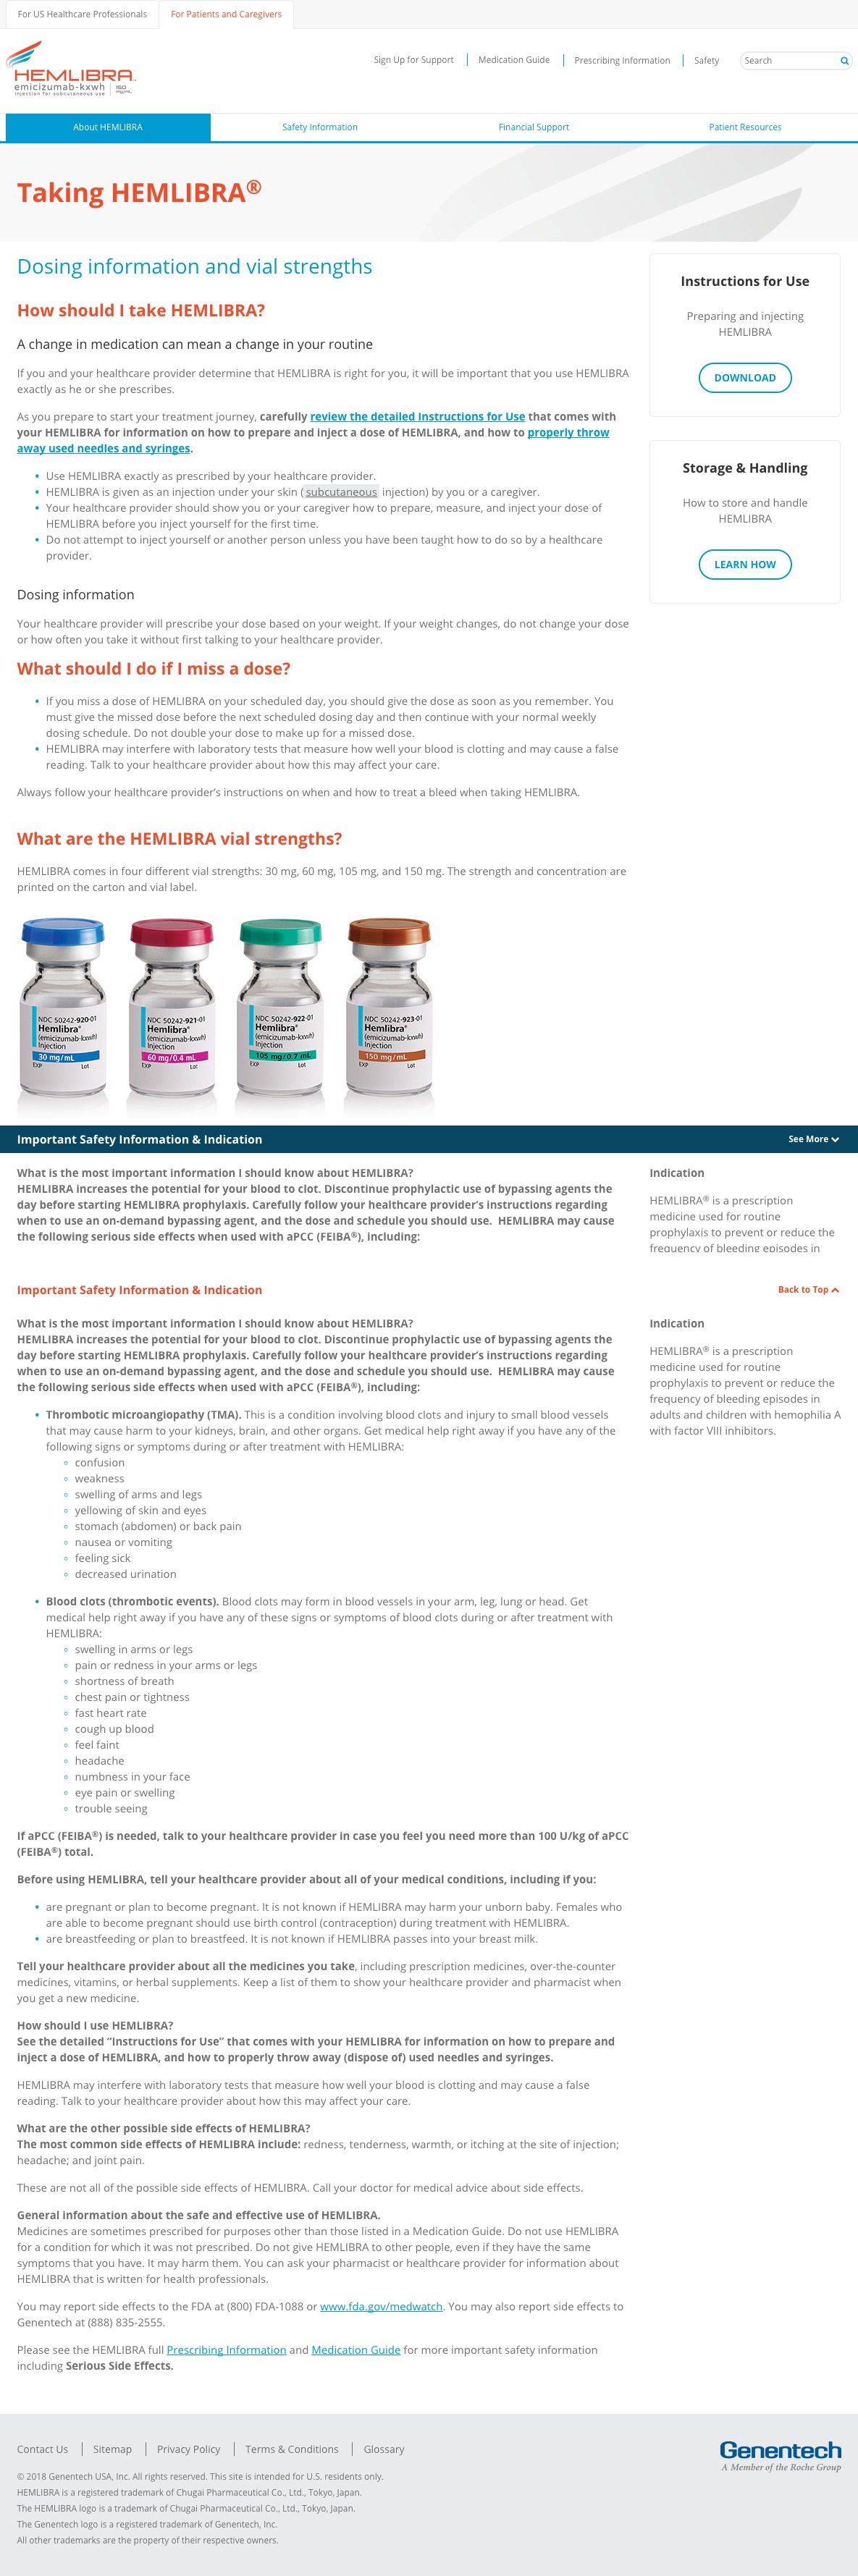 Now approved and available pharmaceutical website: Taking Medication